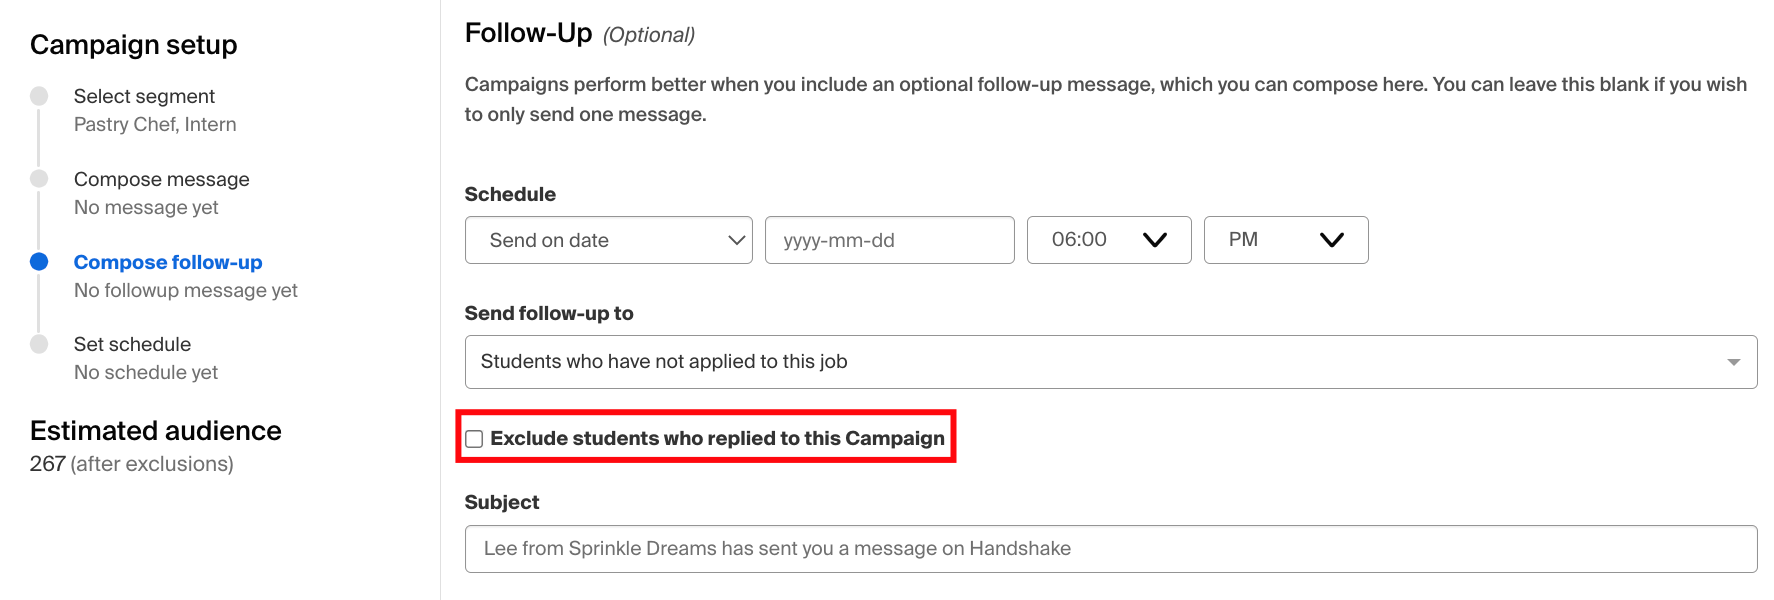 Exclude_students_who_replied_to_this_campaign.png